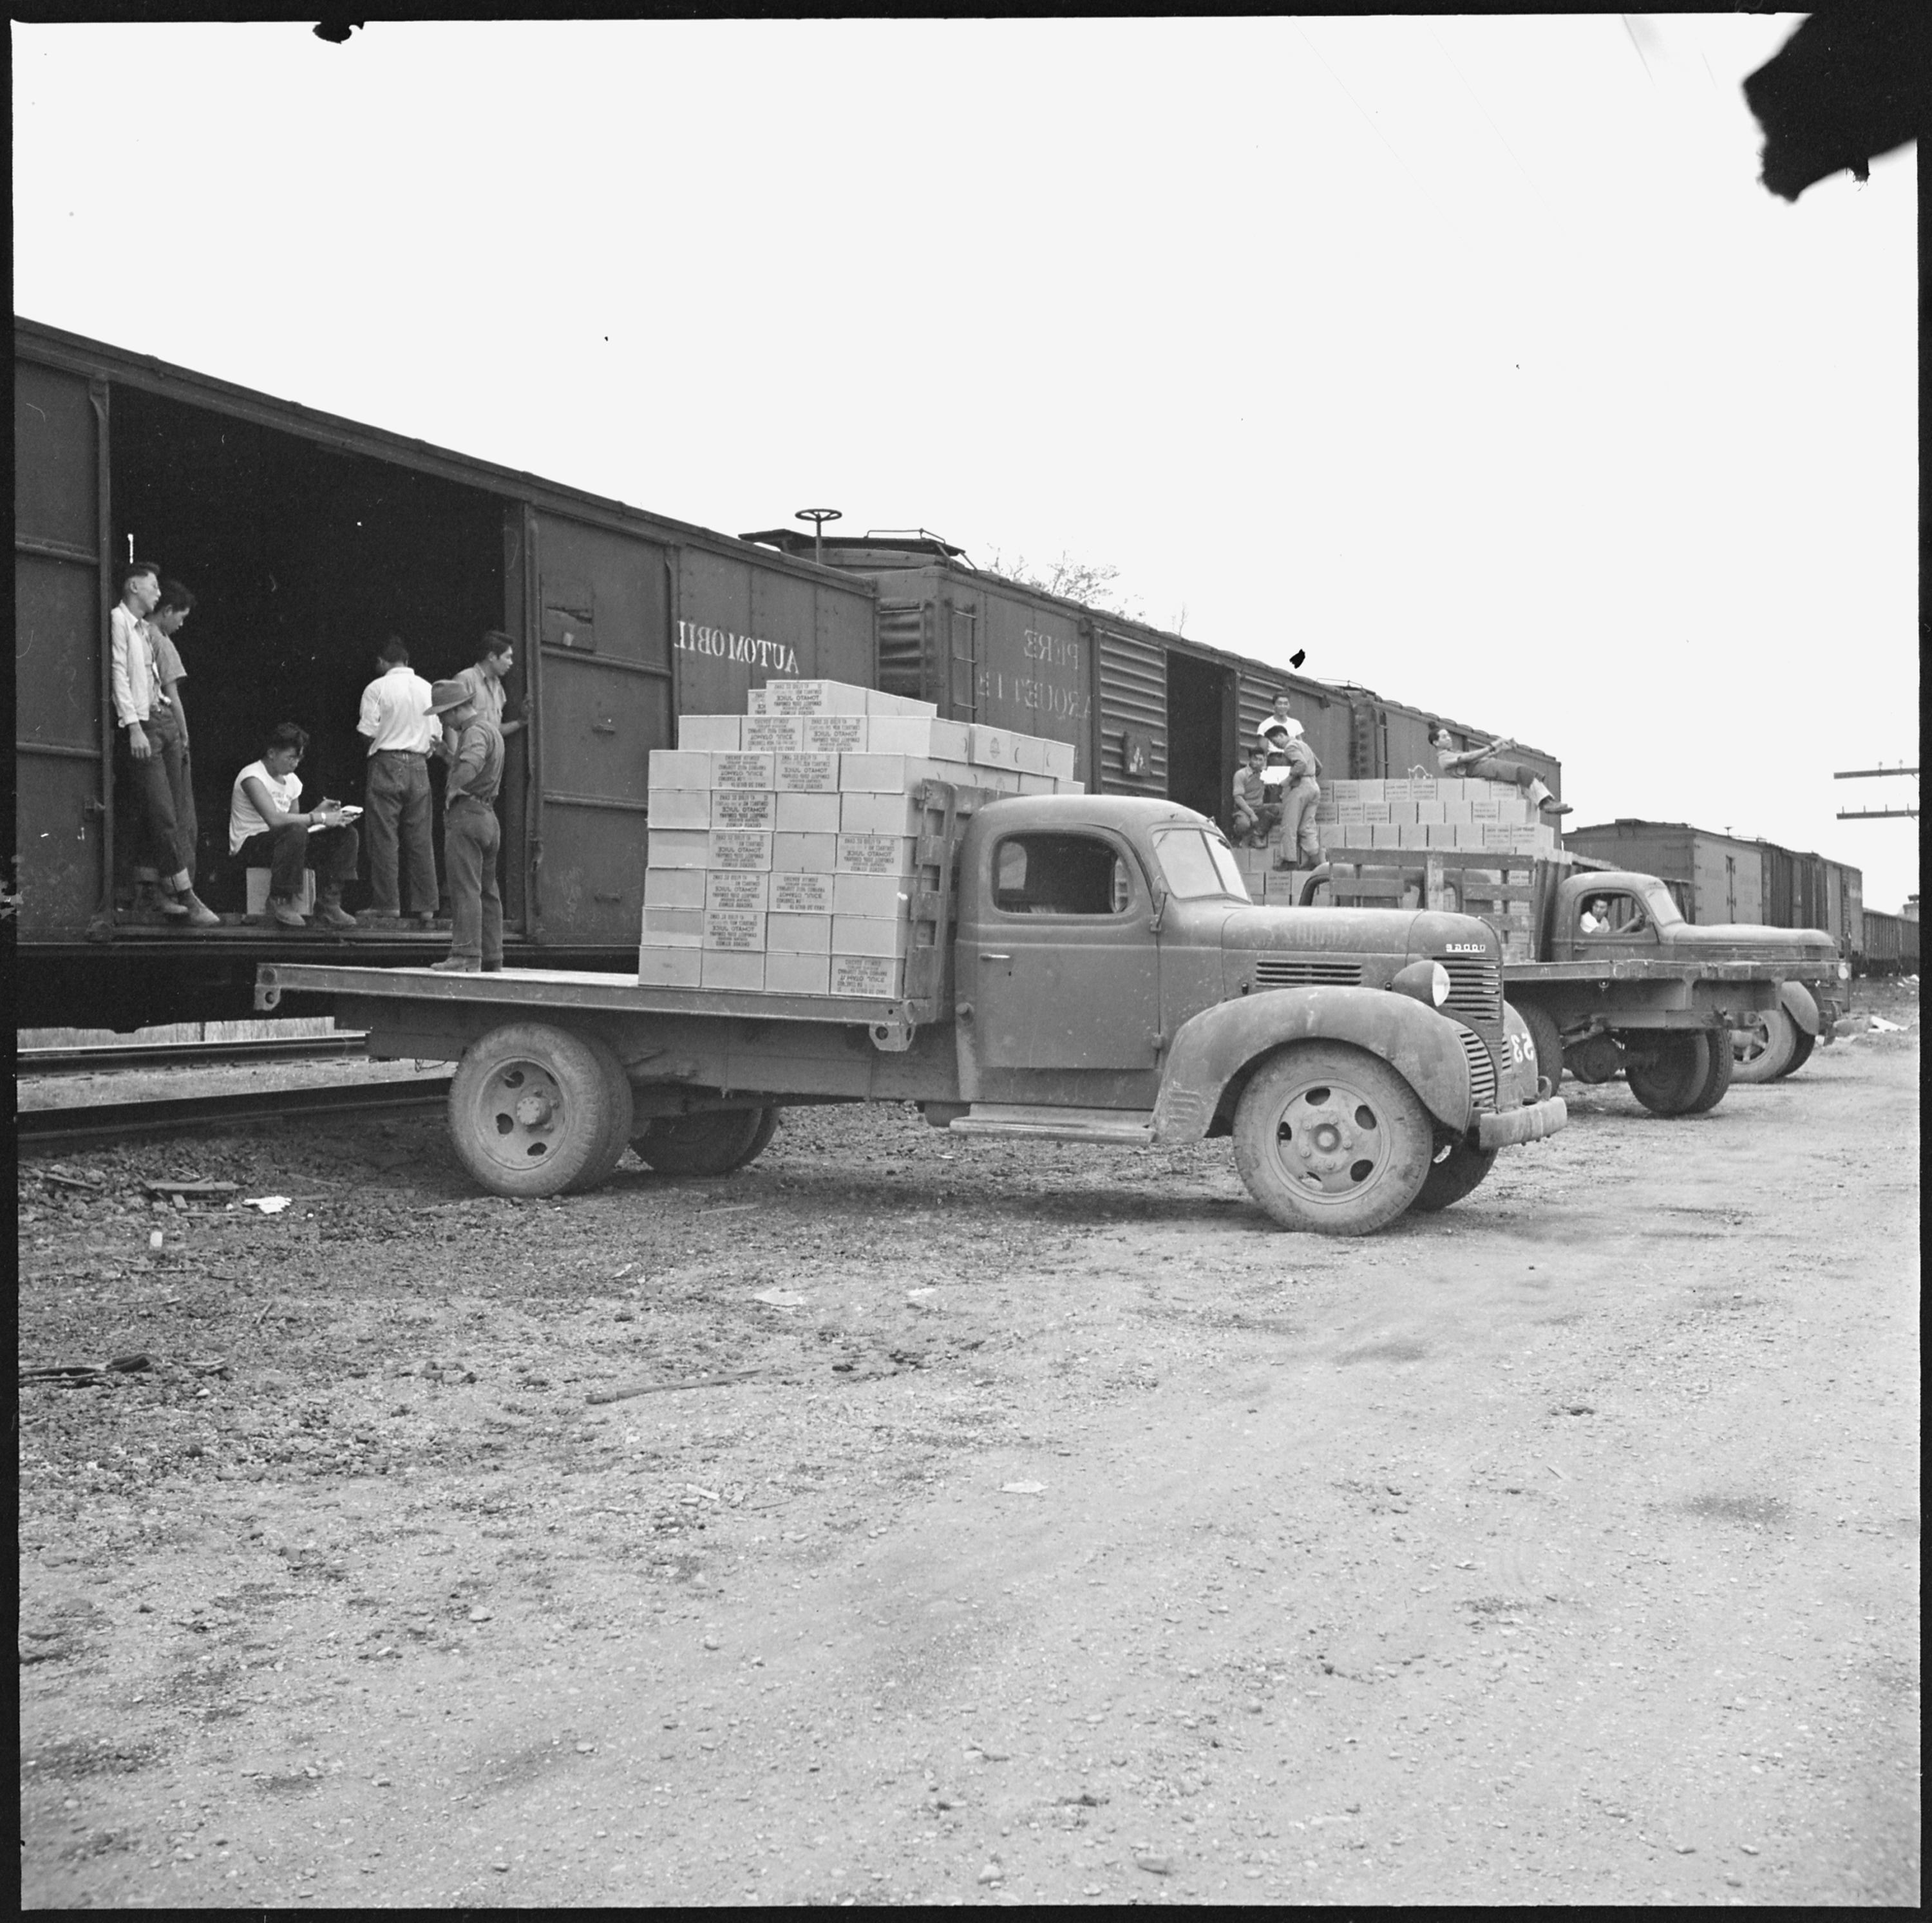 Rohwer Relocation Center, McGehee, Arkansas. Volunteer workers loading a truck from a boxcar for tr . . . - NARA - 538910